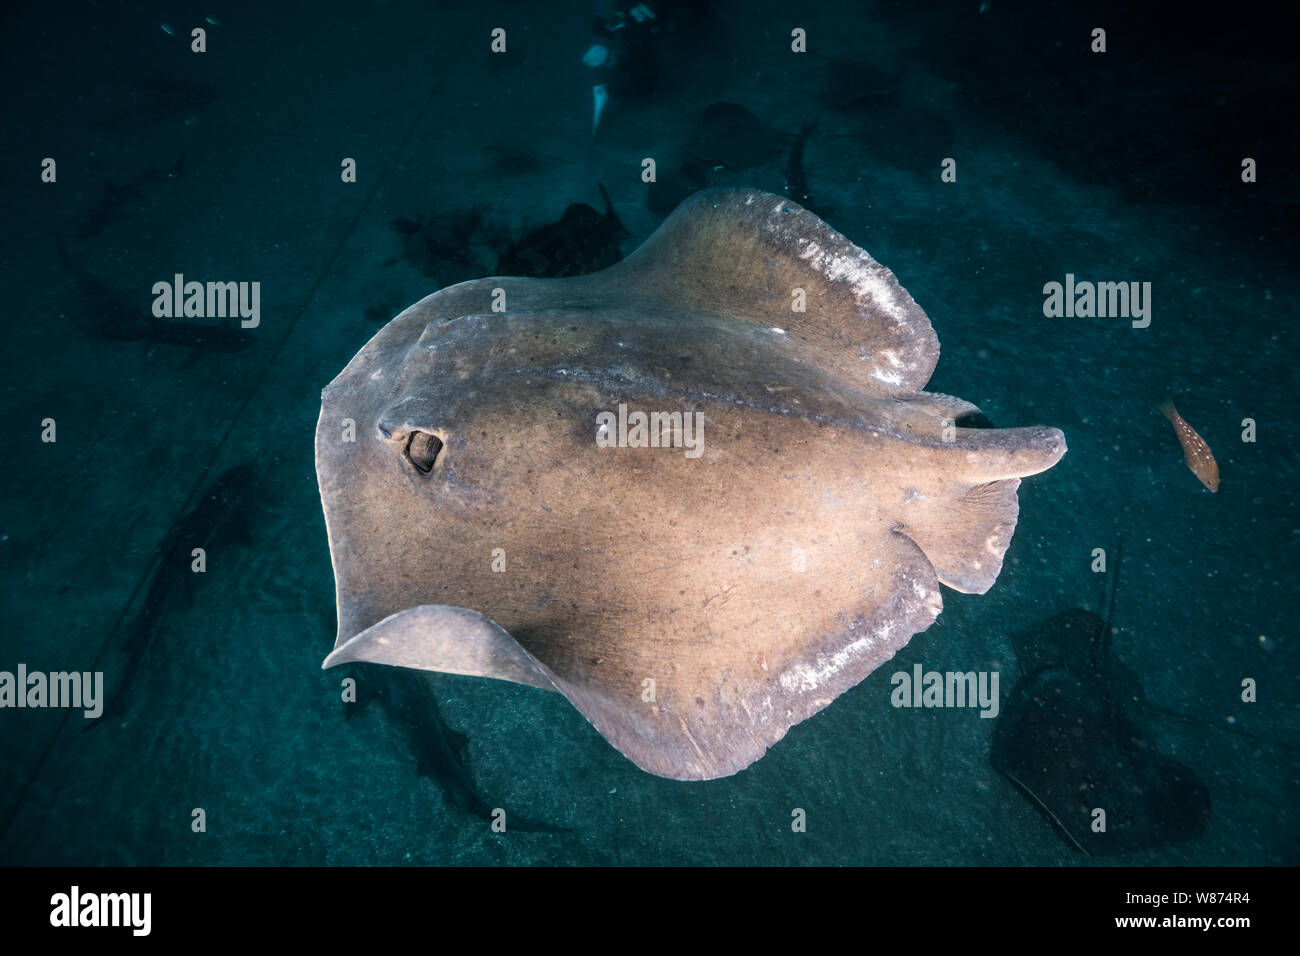 Japanese stingray is swimming over the rock reef. A high angle of view. Japan. Ito, Tateyama, Chiba, Japan Stock Photo